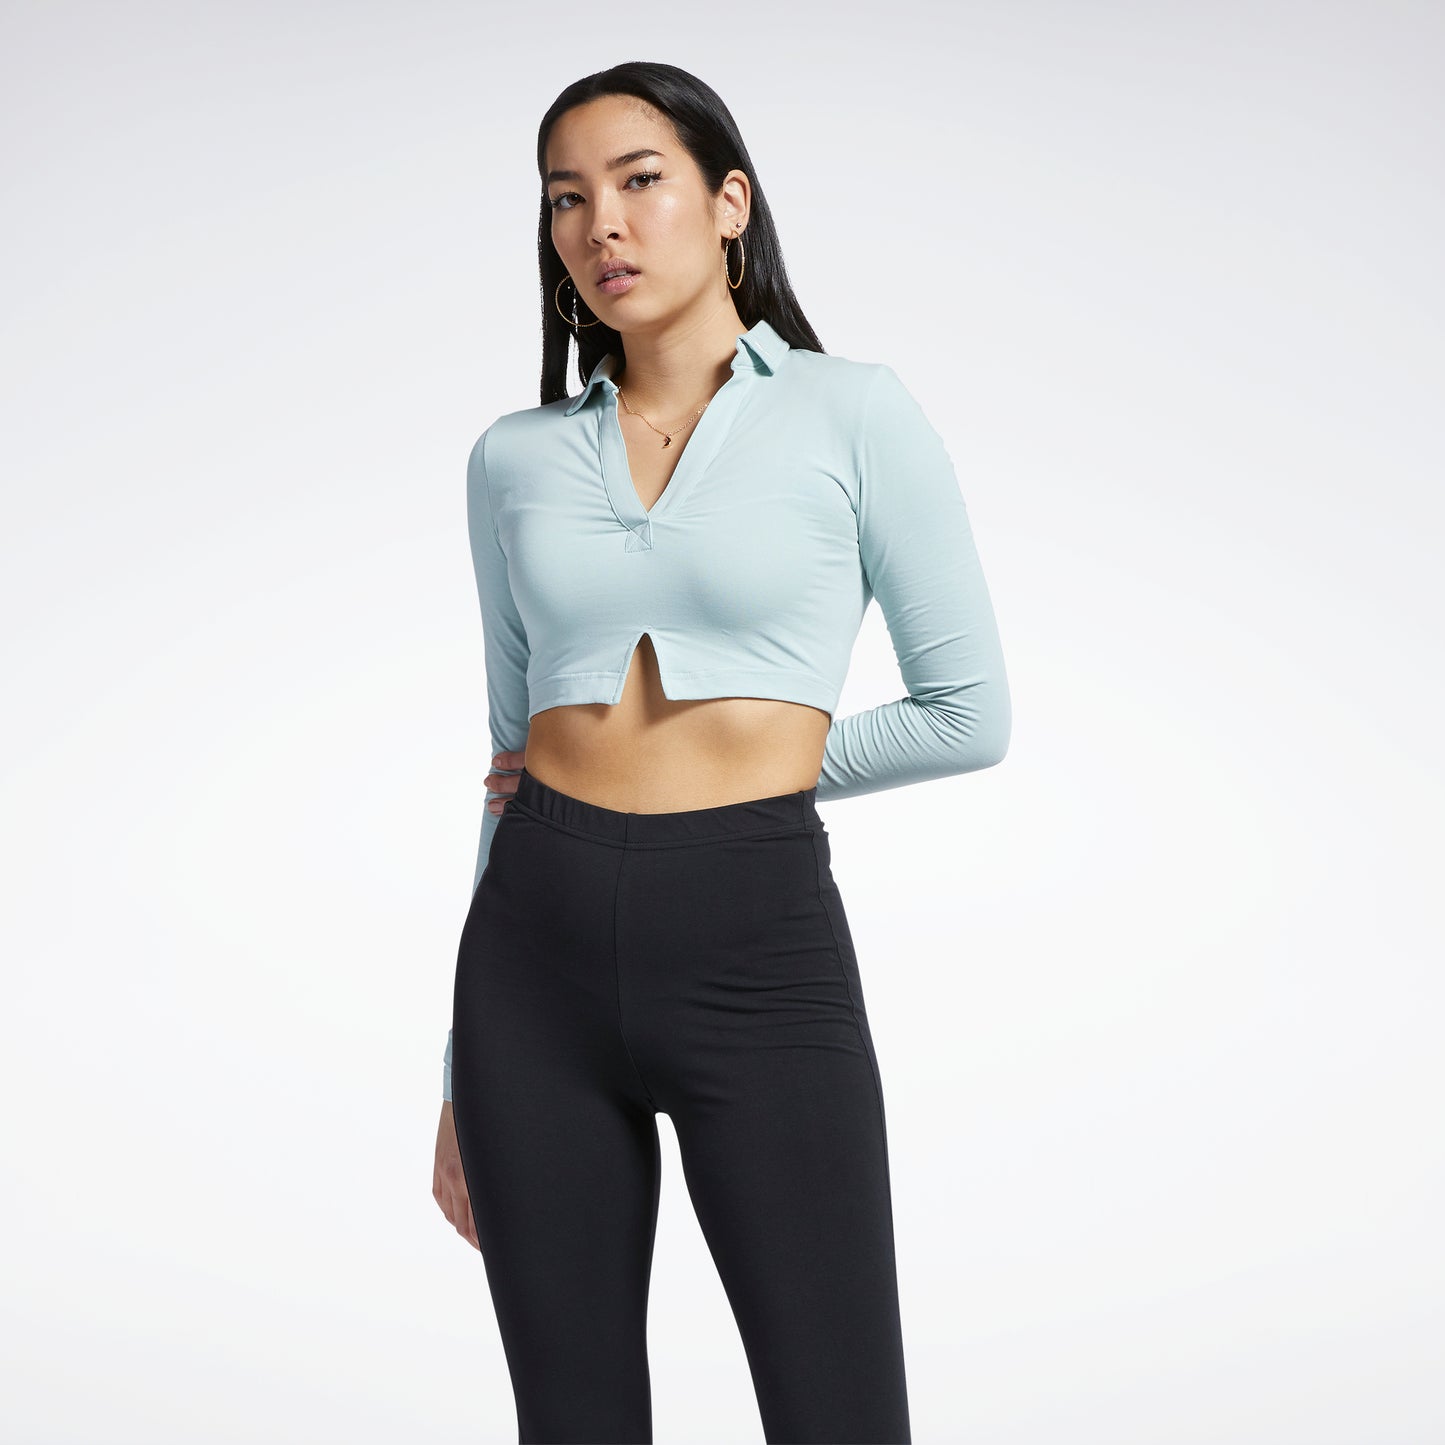 Fashion Look Featuring Reebok Activewear Tops and Avia Tops by